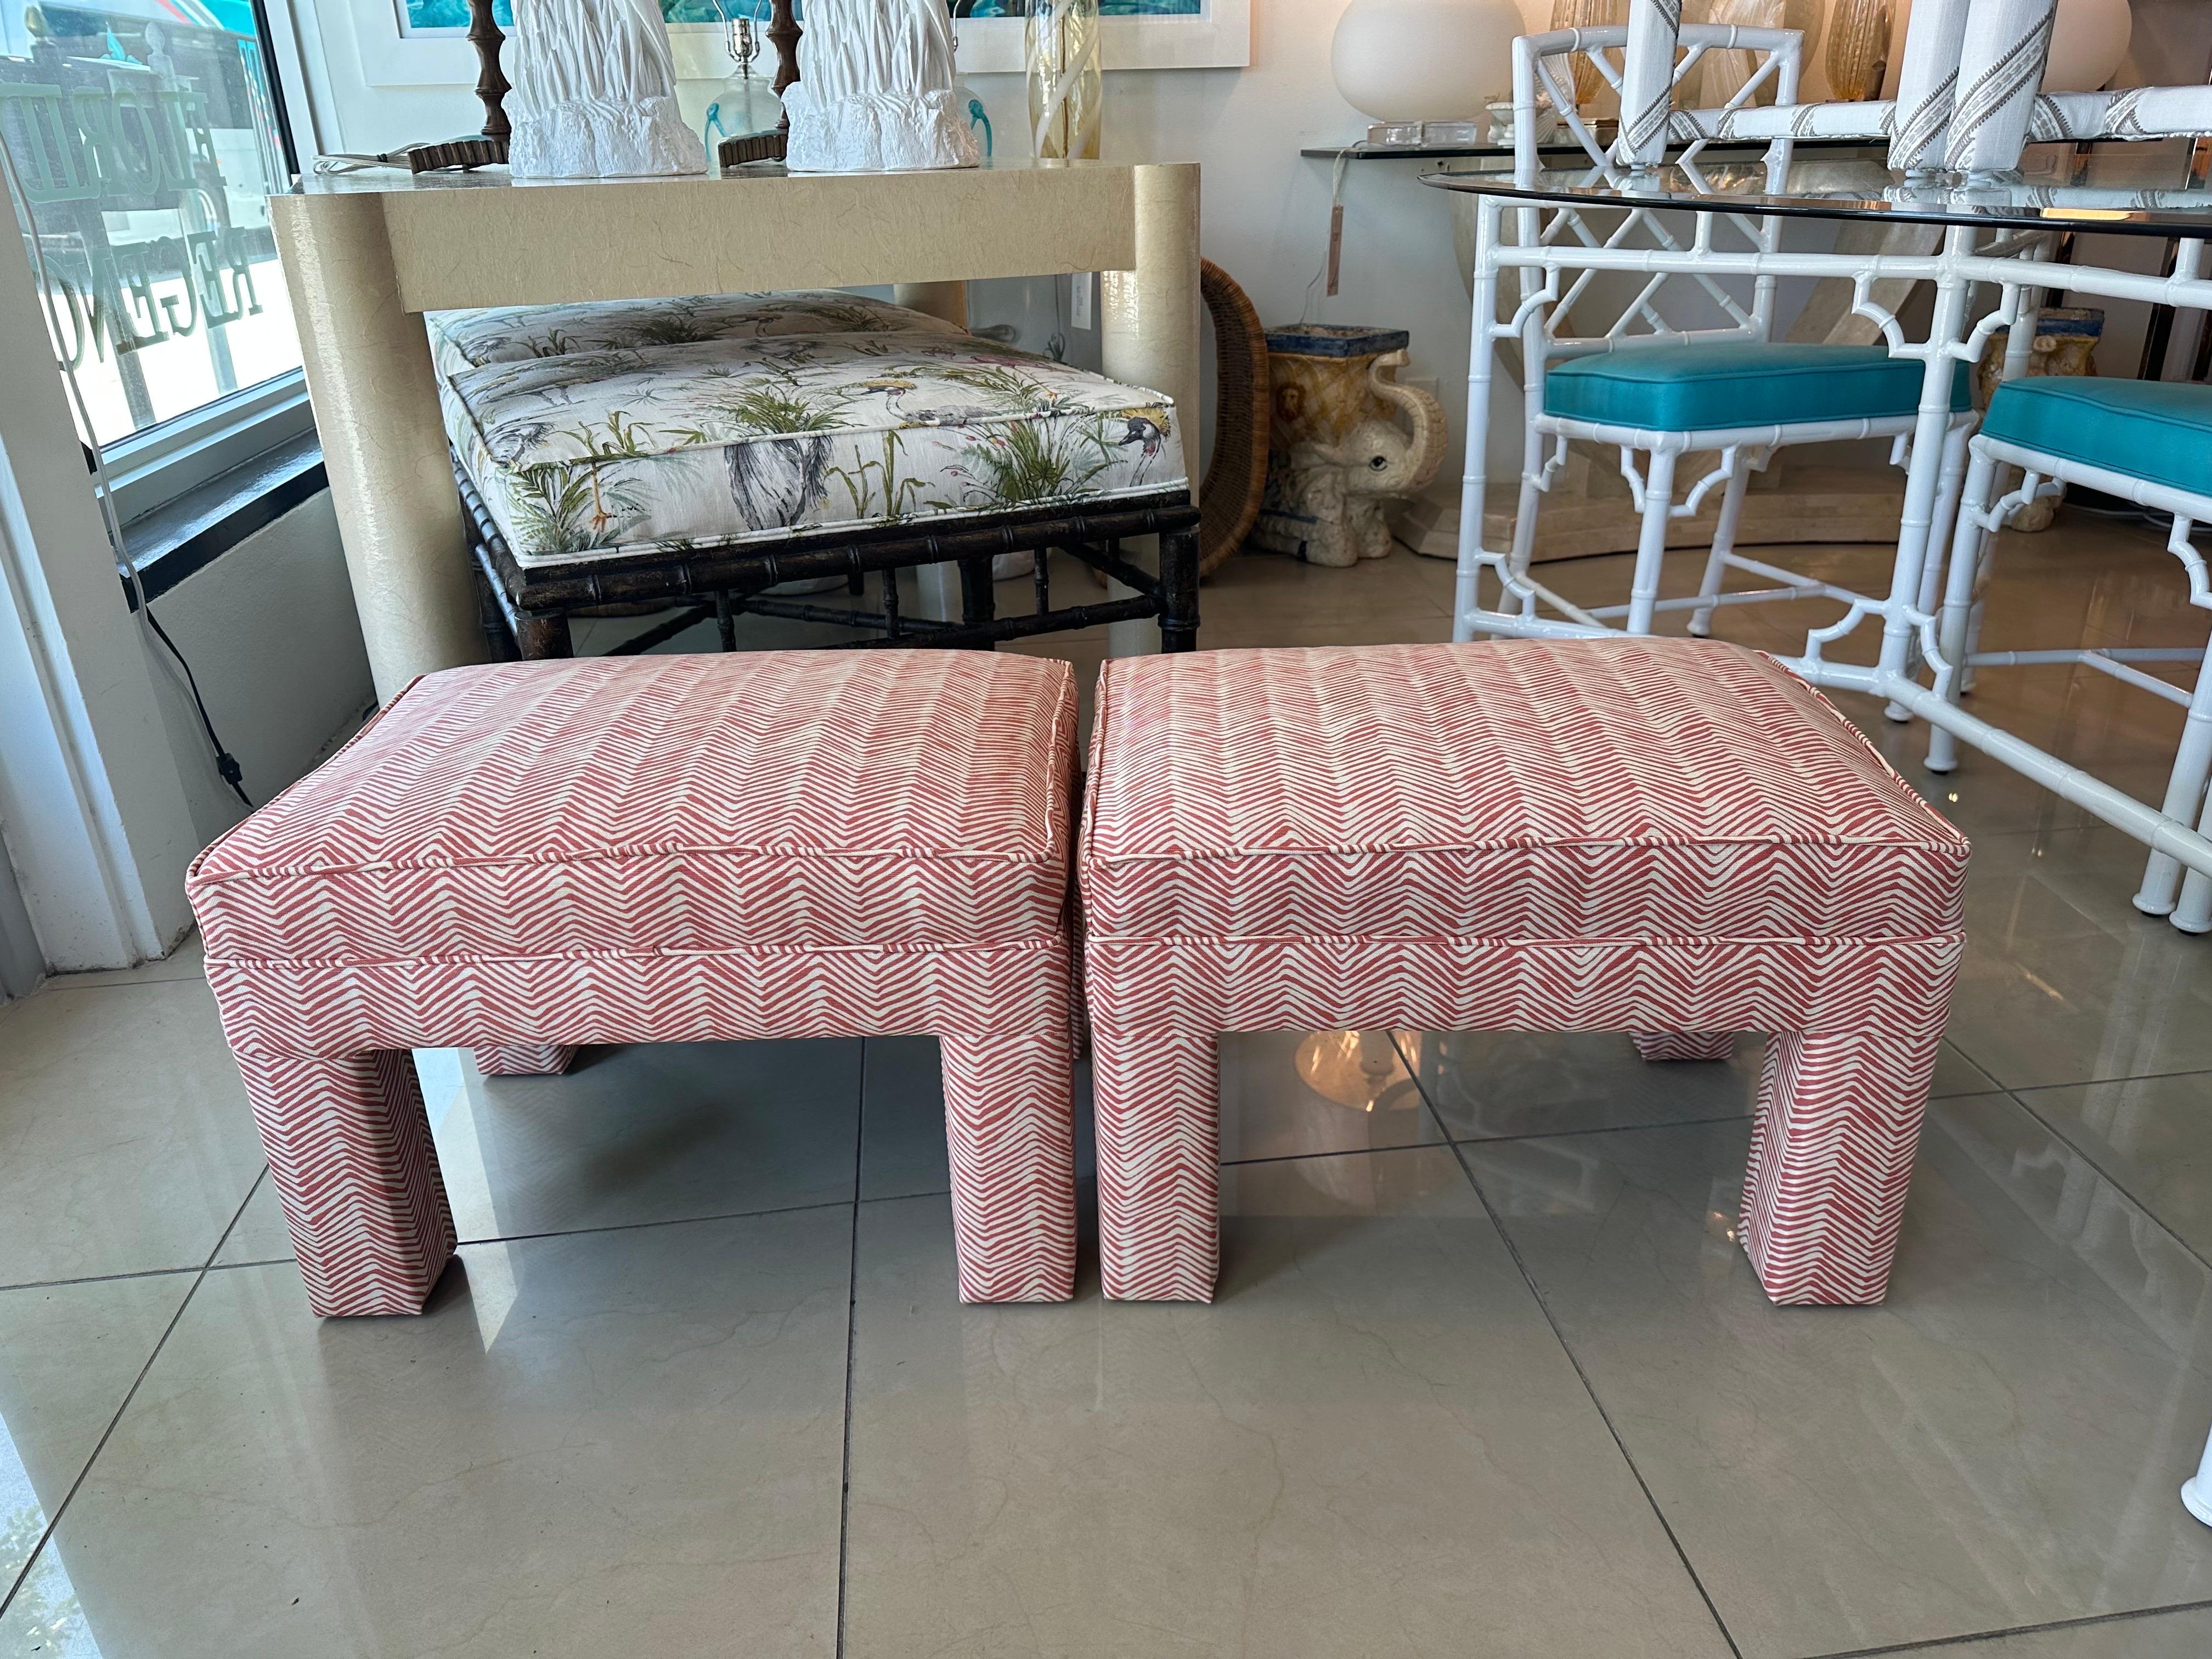 Wonderful pair of vintage 1970s parsons benches stools ottomans. In the style of Billy Baldwin. These have been newly upholstered a beautiful coral Quadrille fabric. Dimensions: 15.5 H x 16.5 D x 22.5 W.